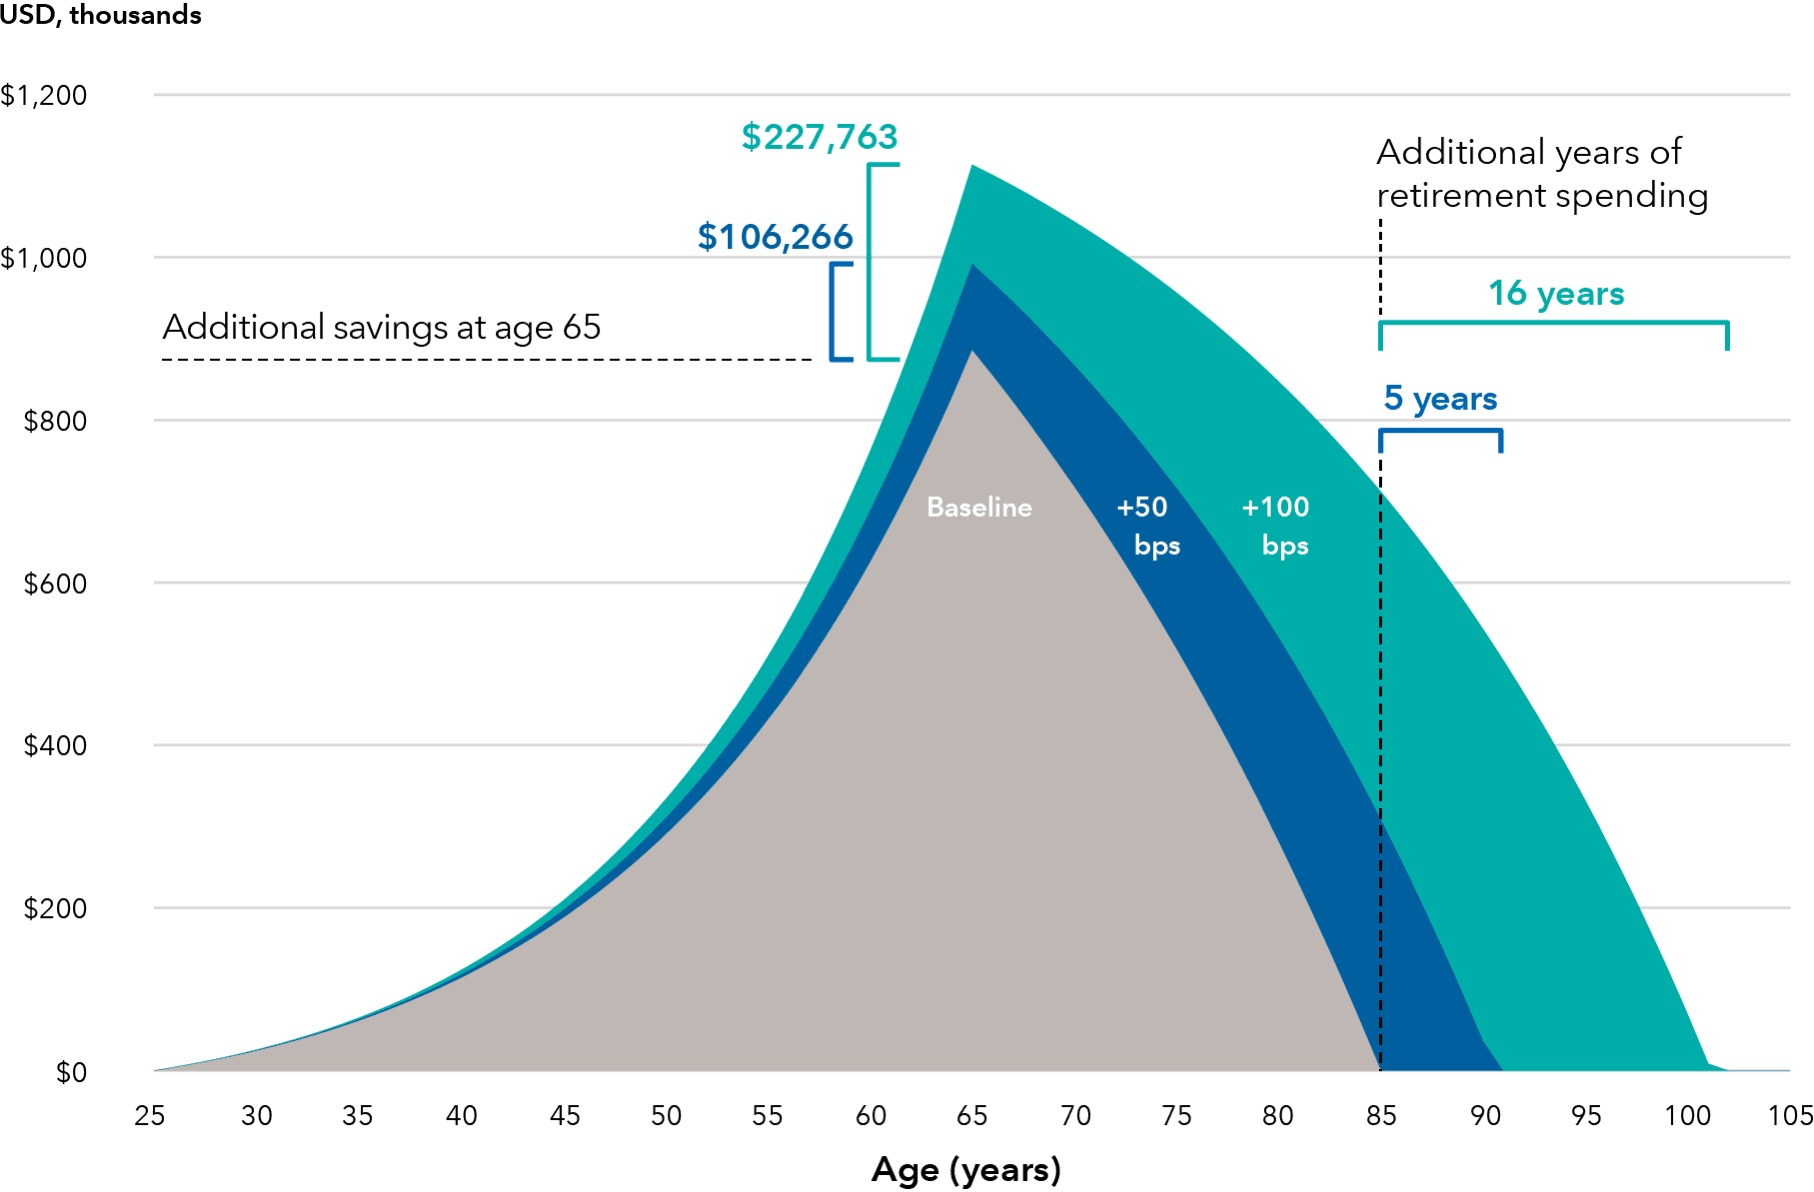 This graph is a visual representation of the Demographic and Scenario assumptions below. It shows that, over 40 years of investing, the baseline account balance was $886,415. The account balance, with a return of 0.50% more, would be $106,266 higher, and with a return of 1.00% more, would be $227,763 higher. With annual withdrawals of $60,260, the returns of 0.50% and 1.00% more would provide 5 years and 16 years of additional retirement spending, respectively.